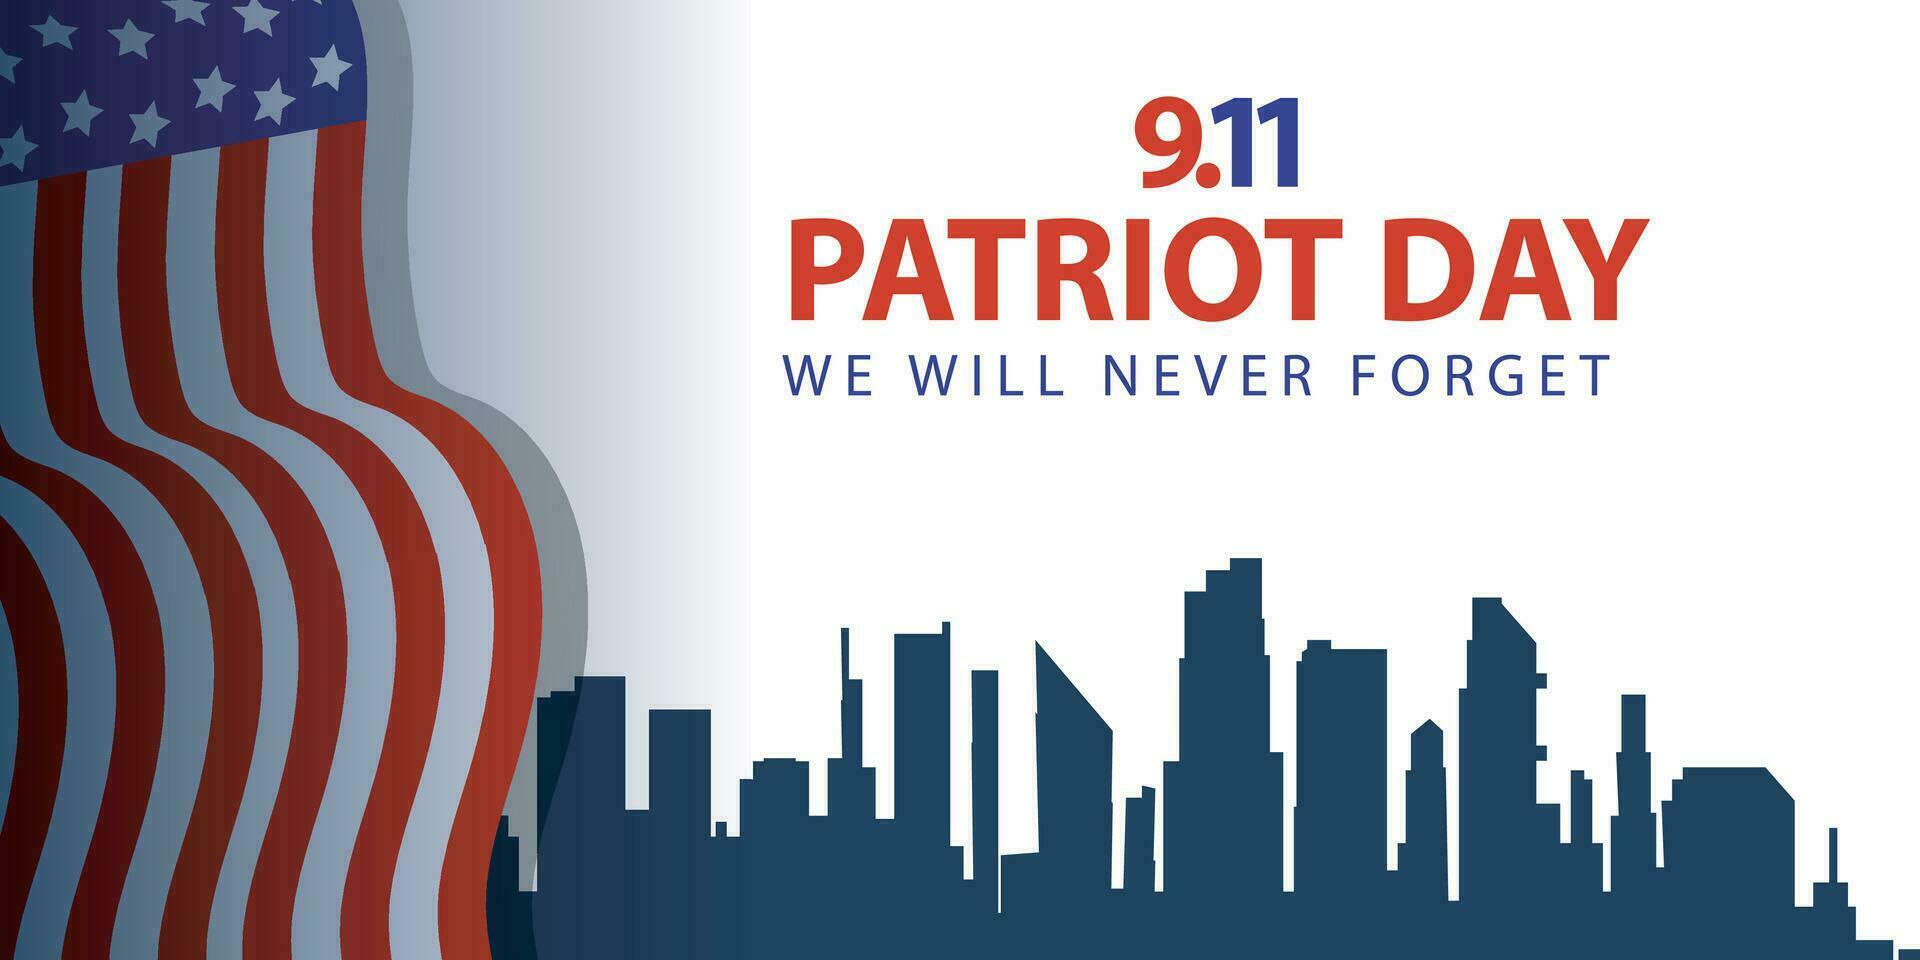 patriot day we will never forget. banner, social media post, flyer or greeting card with blue red democracy story and American flag theme. vector illustration